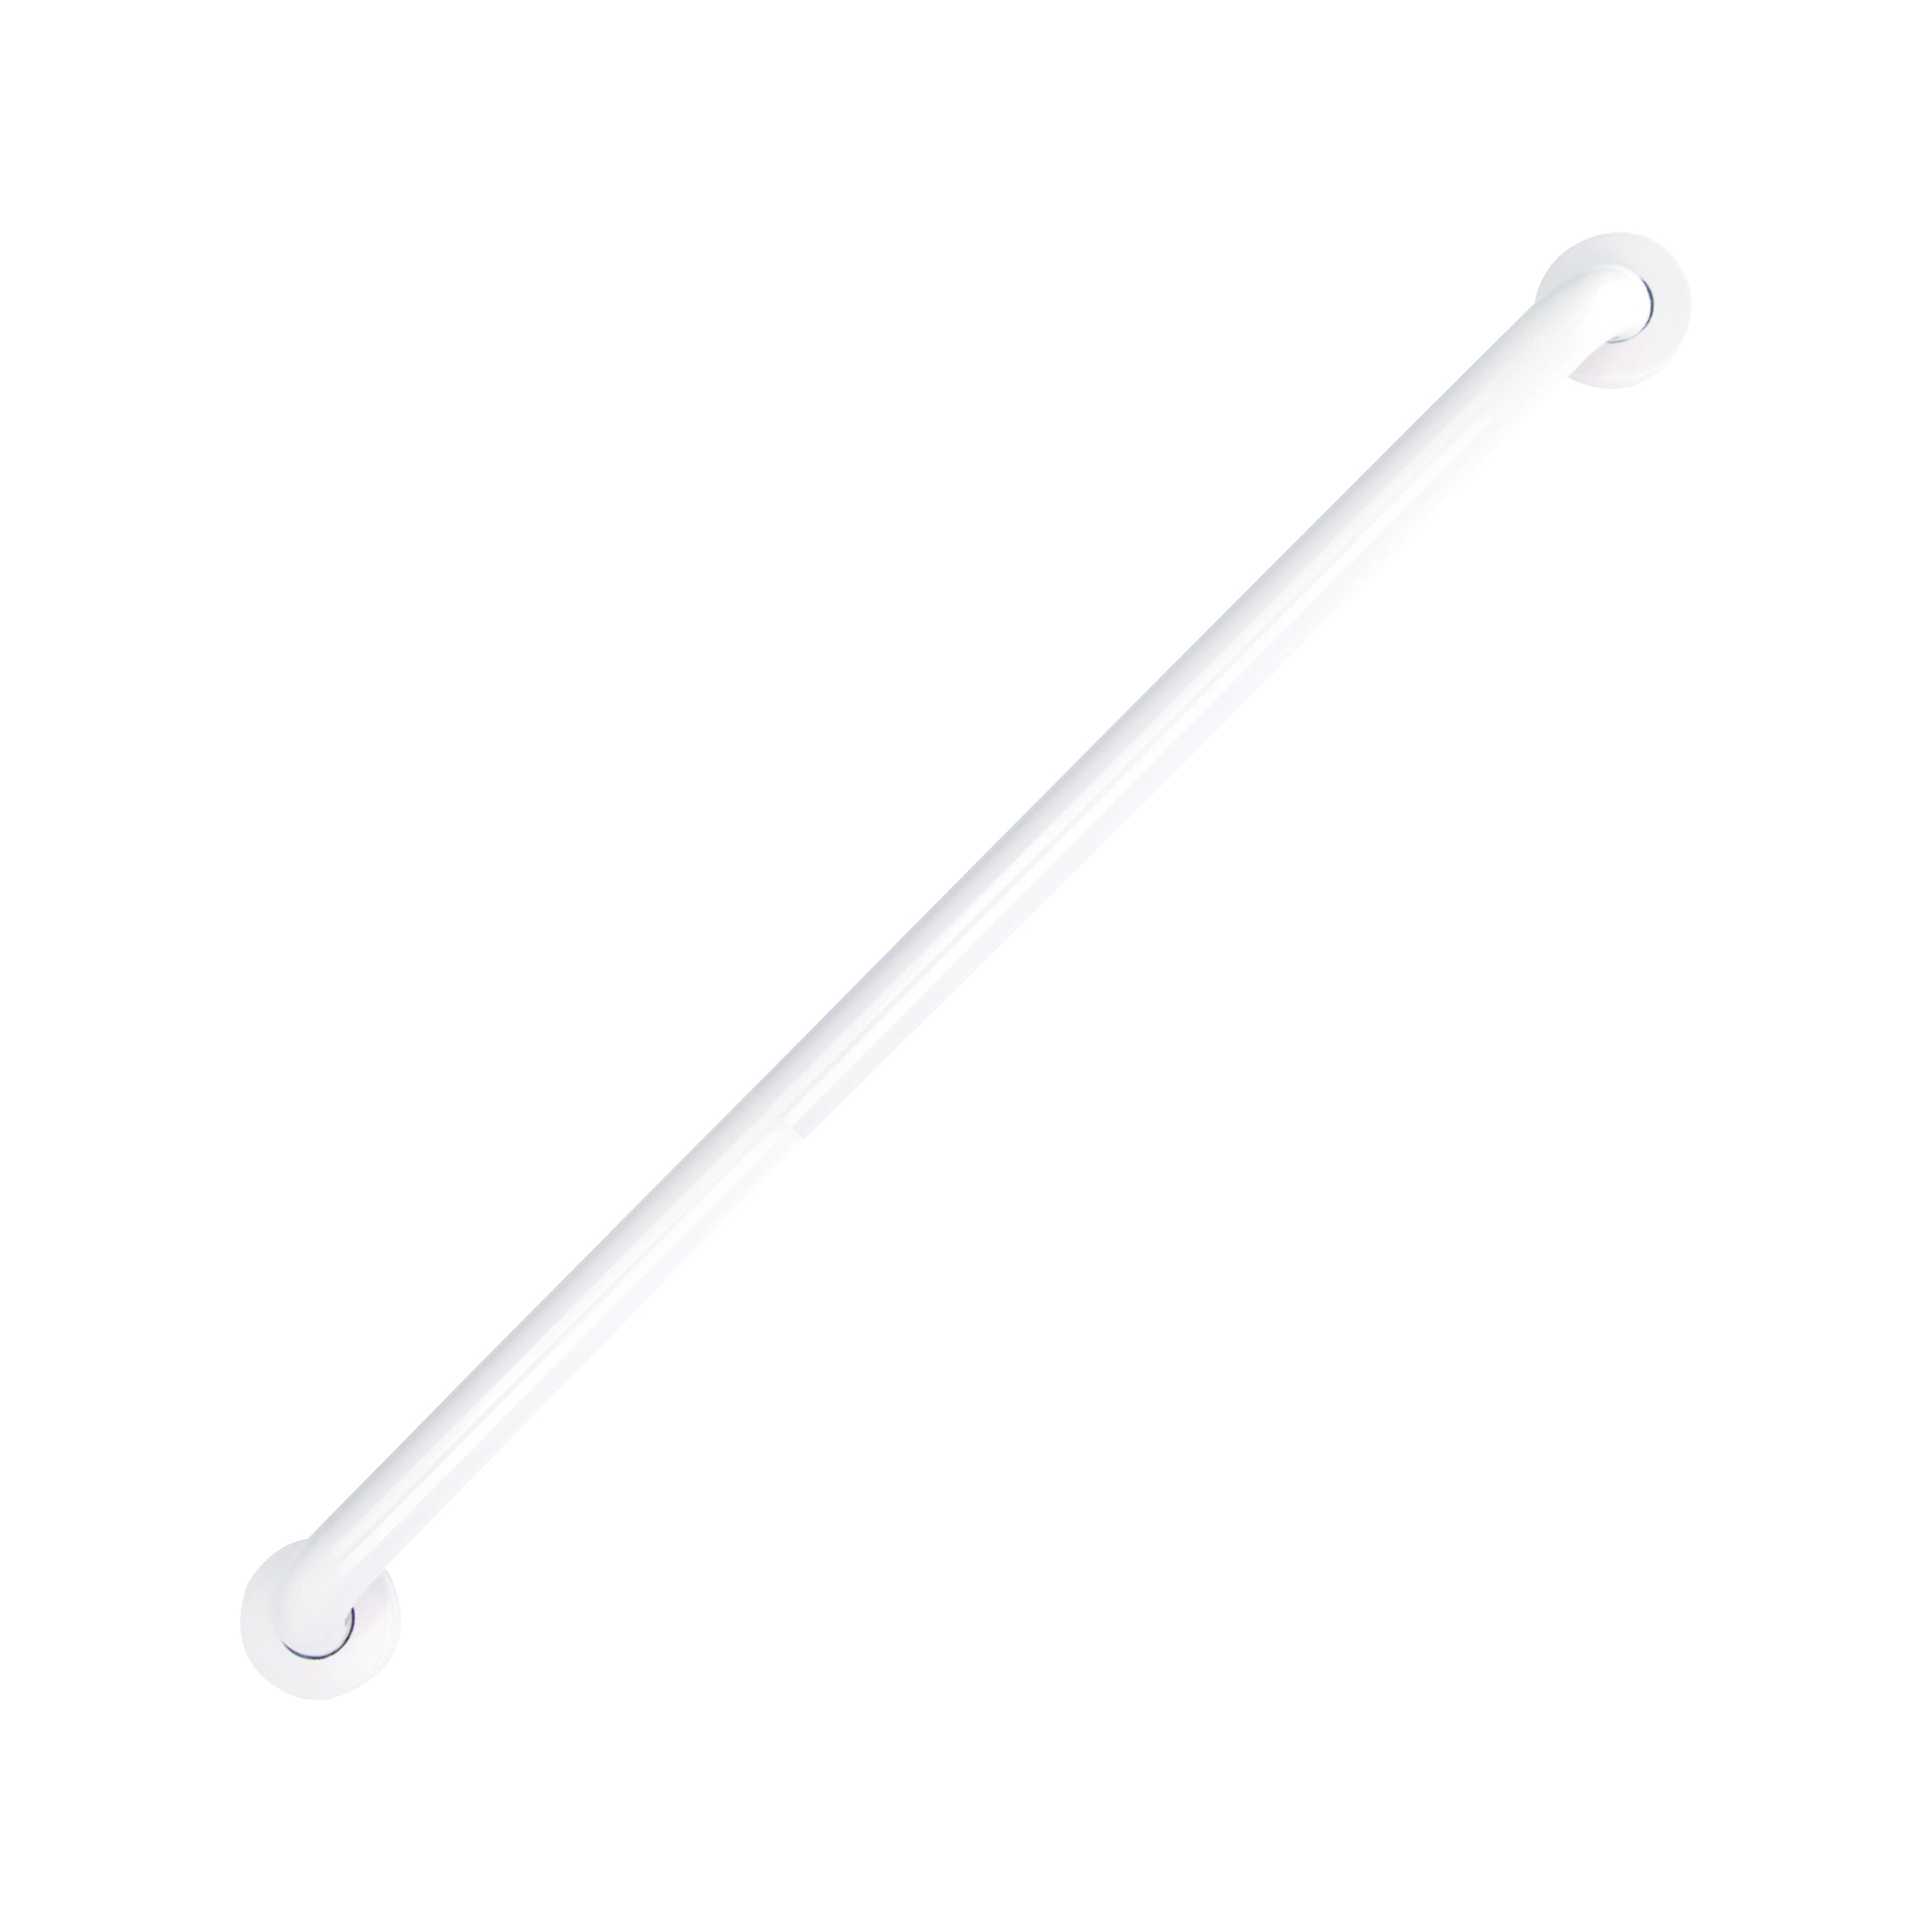 SG01-01&0236 Safety Grab Bar, 36 in L Bar, White, Wall Mounted Mounting